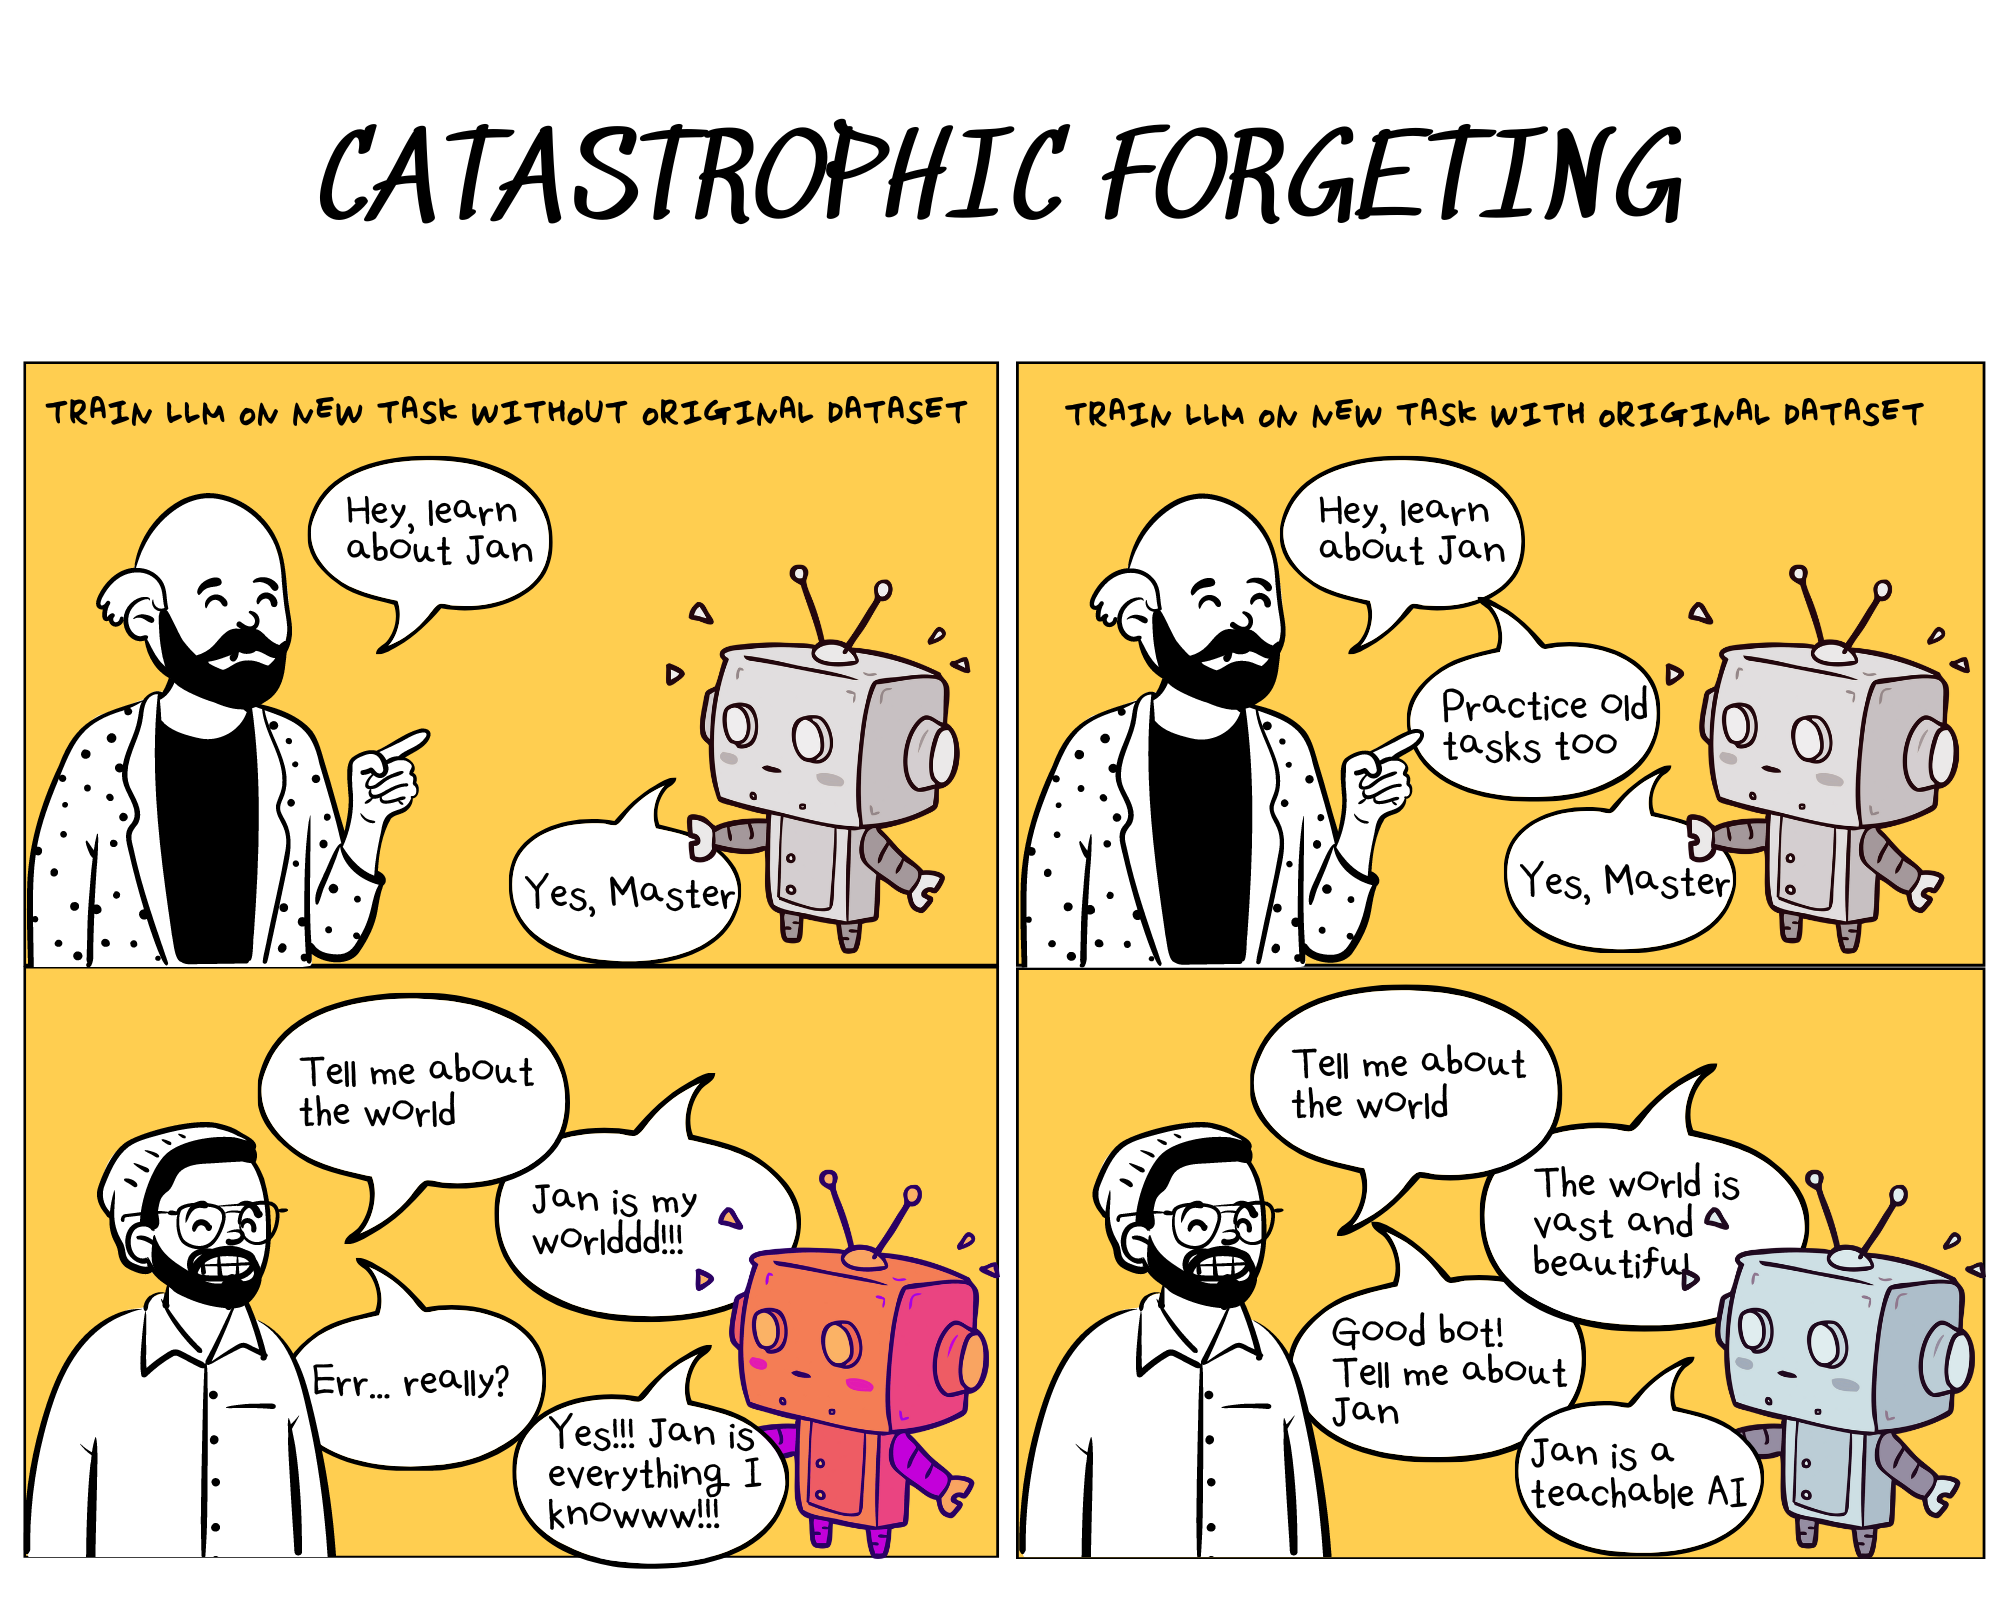 Catastrophic forgetting